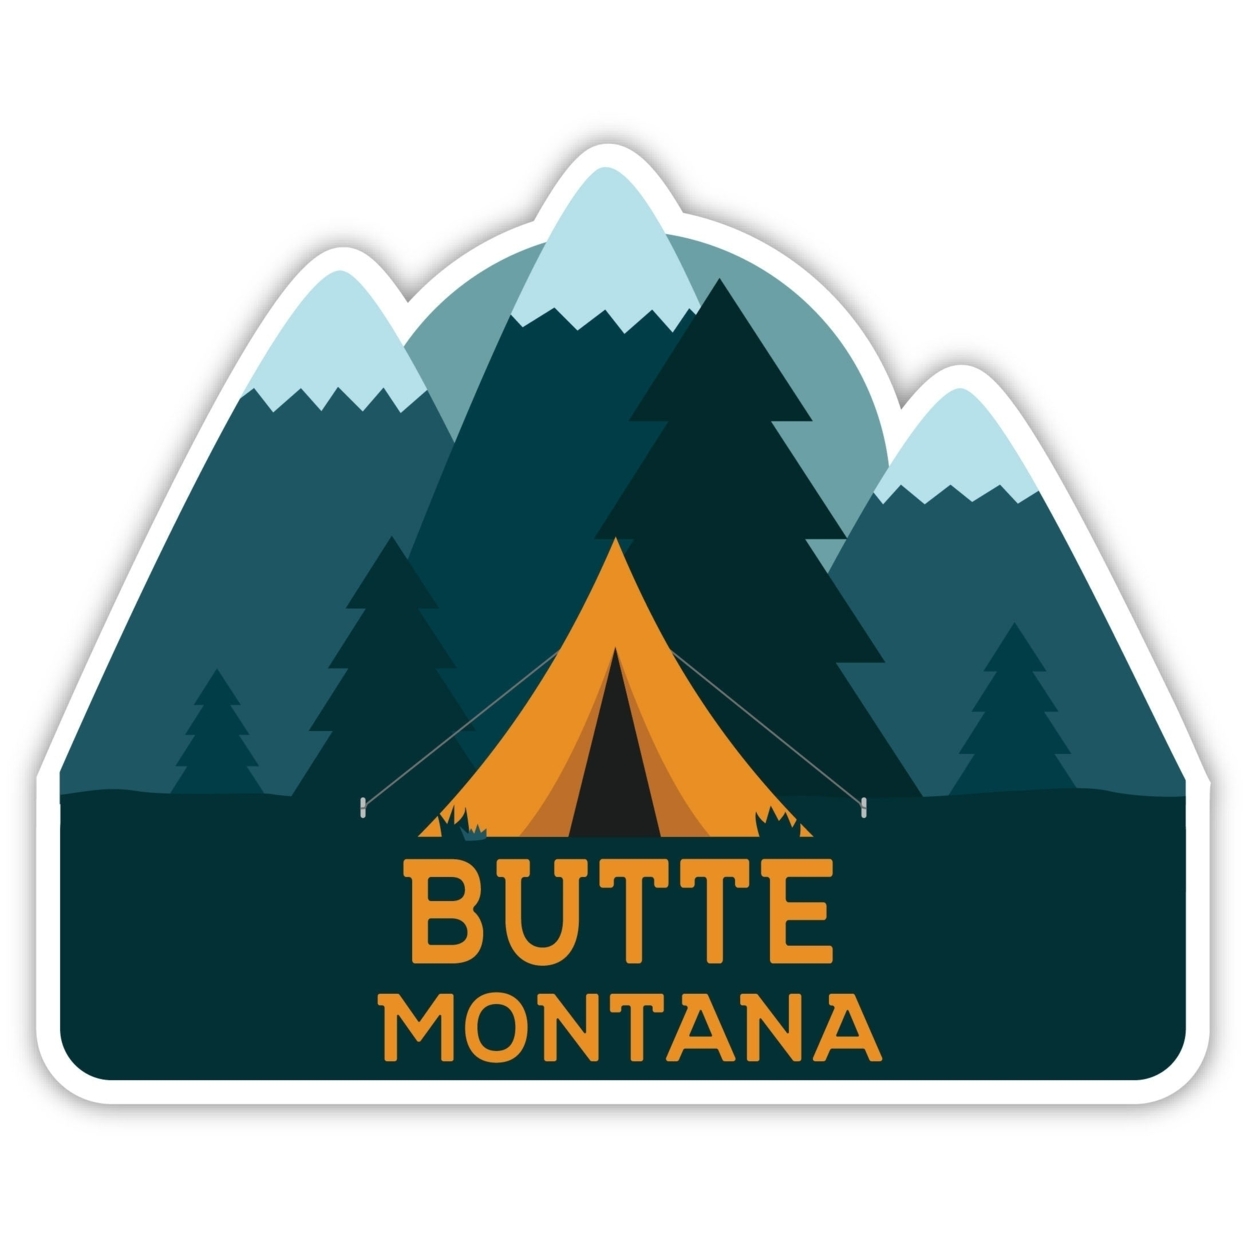 Butte Montana Souvenir Decorative Stickers (Choose Theme And Size) - Single Unit, 2-Inch, Great Outdoors